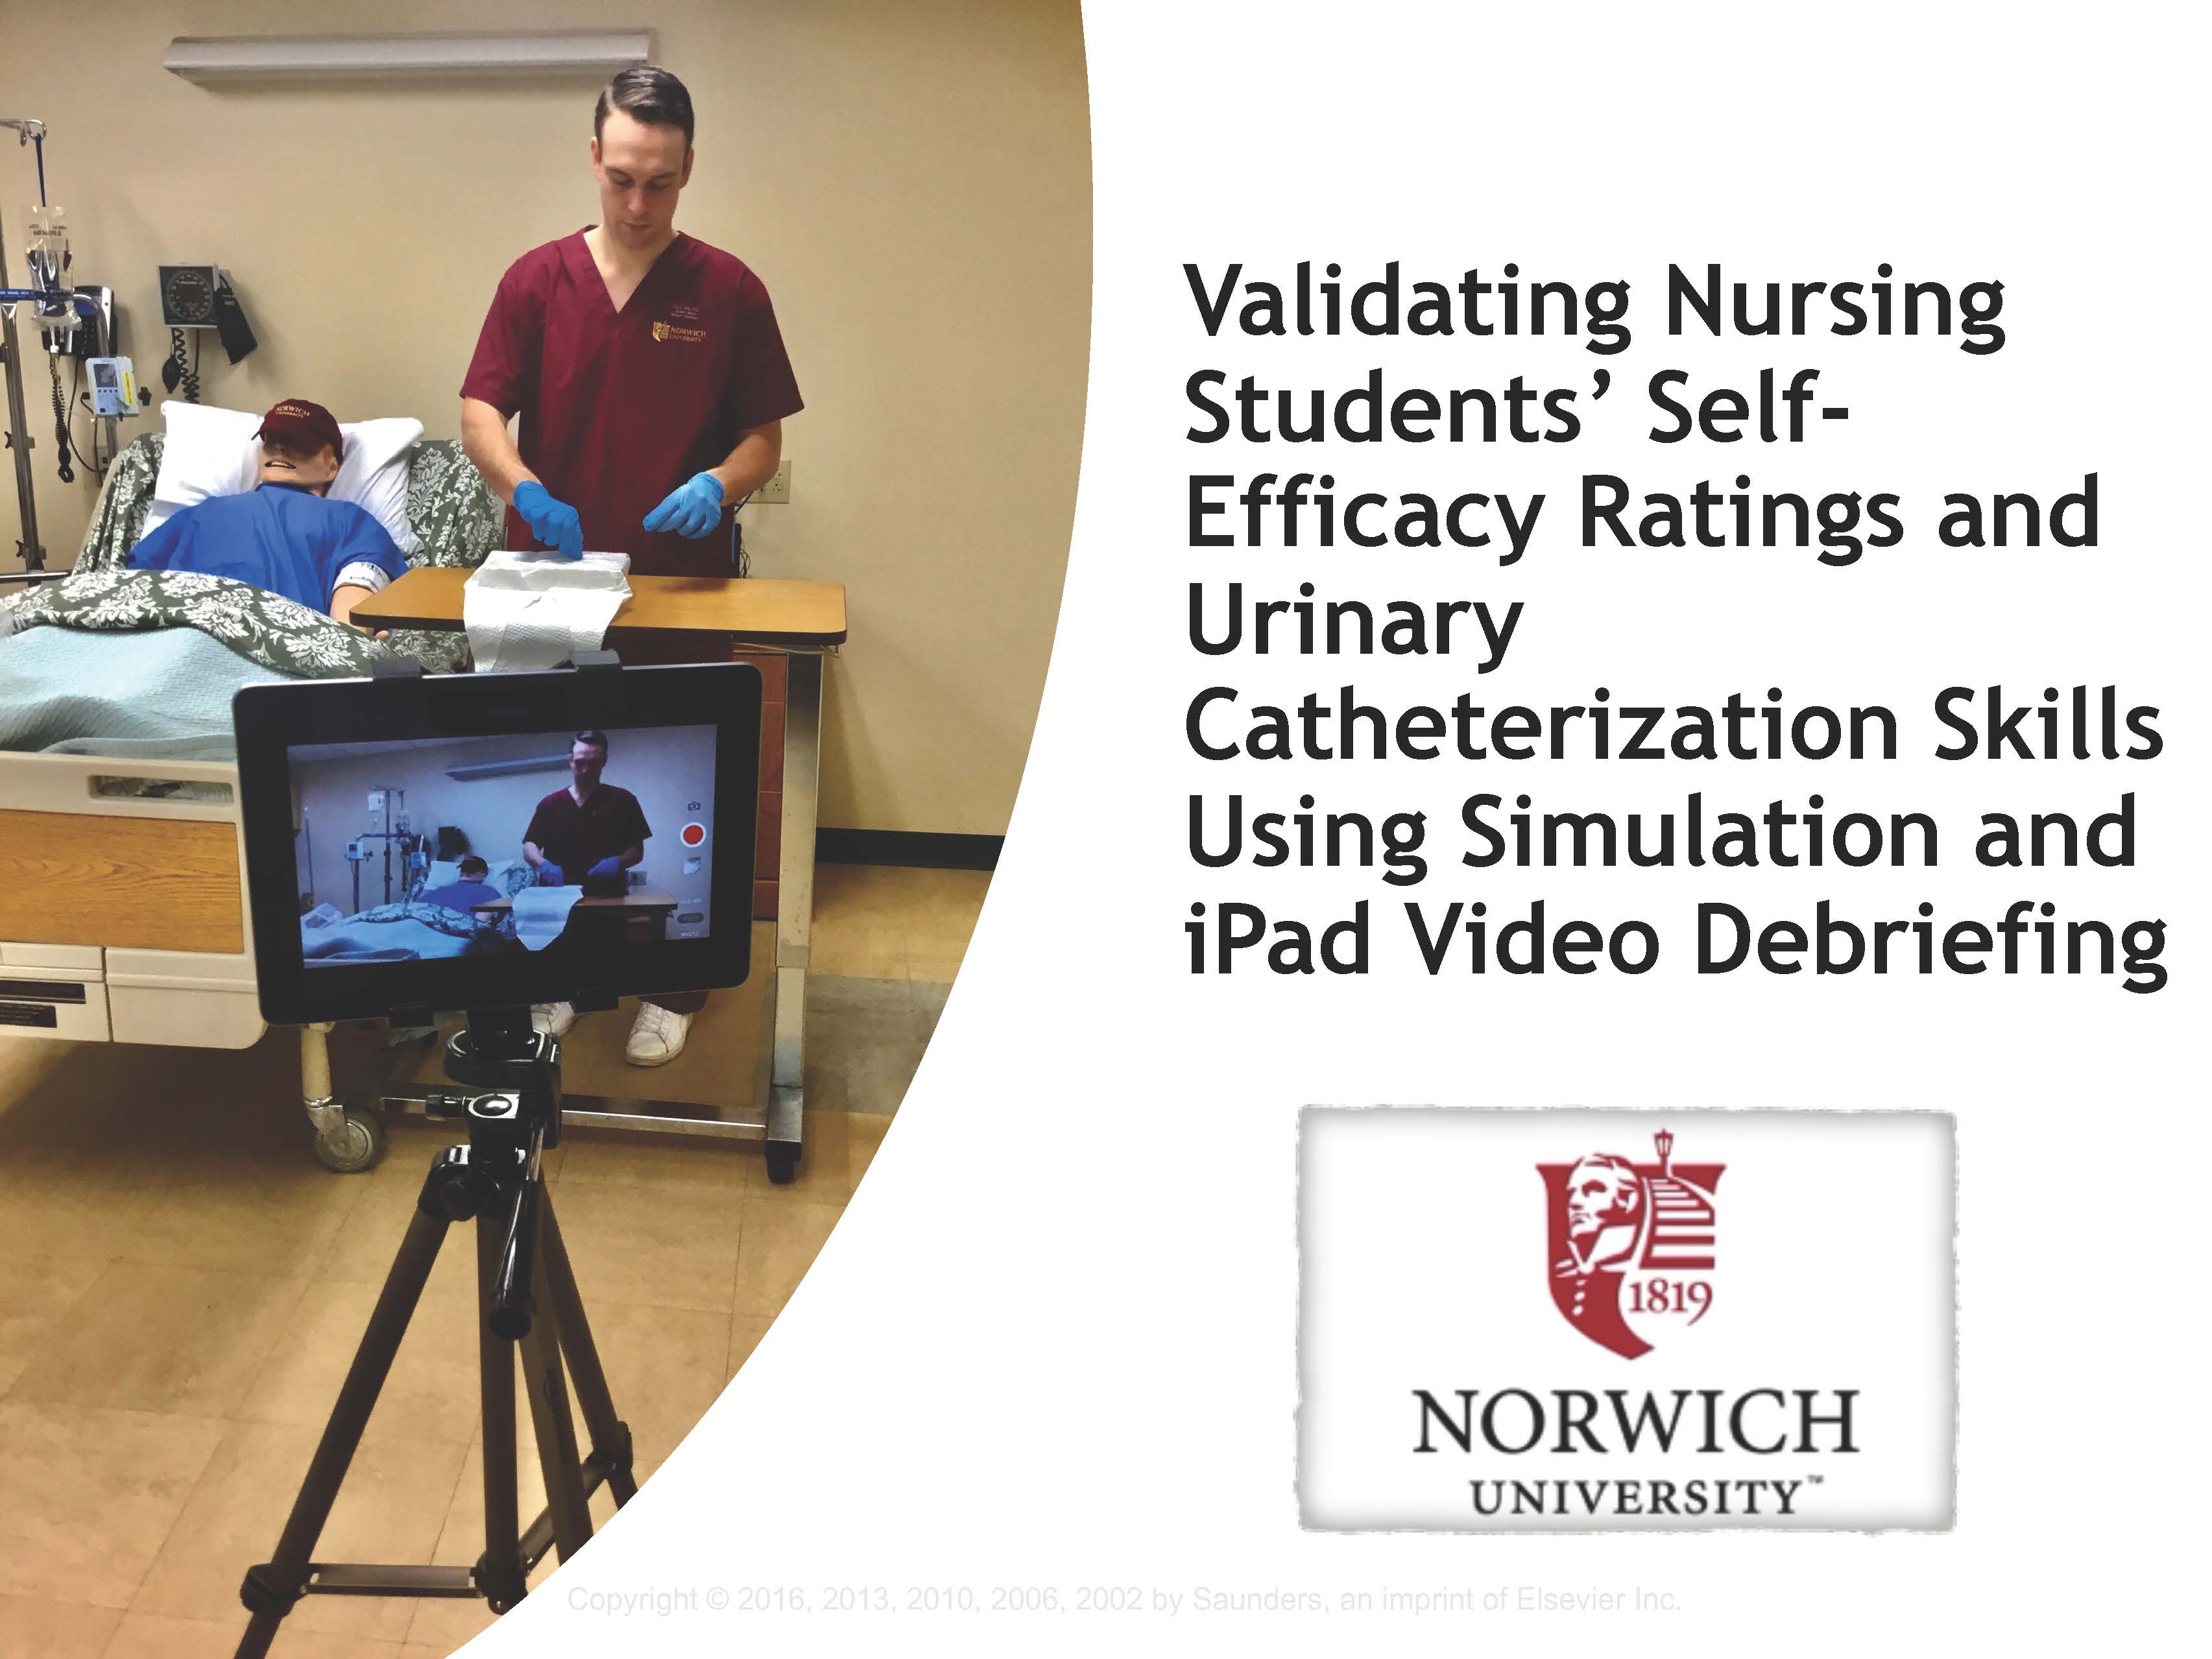 Showcase Image for Validating Nursing Students’ Self-Efficacy Ratings and Urinary Catheterization Skills Using Simulation and iPad Video Debriefing